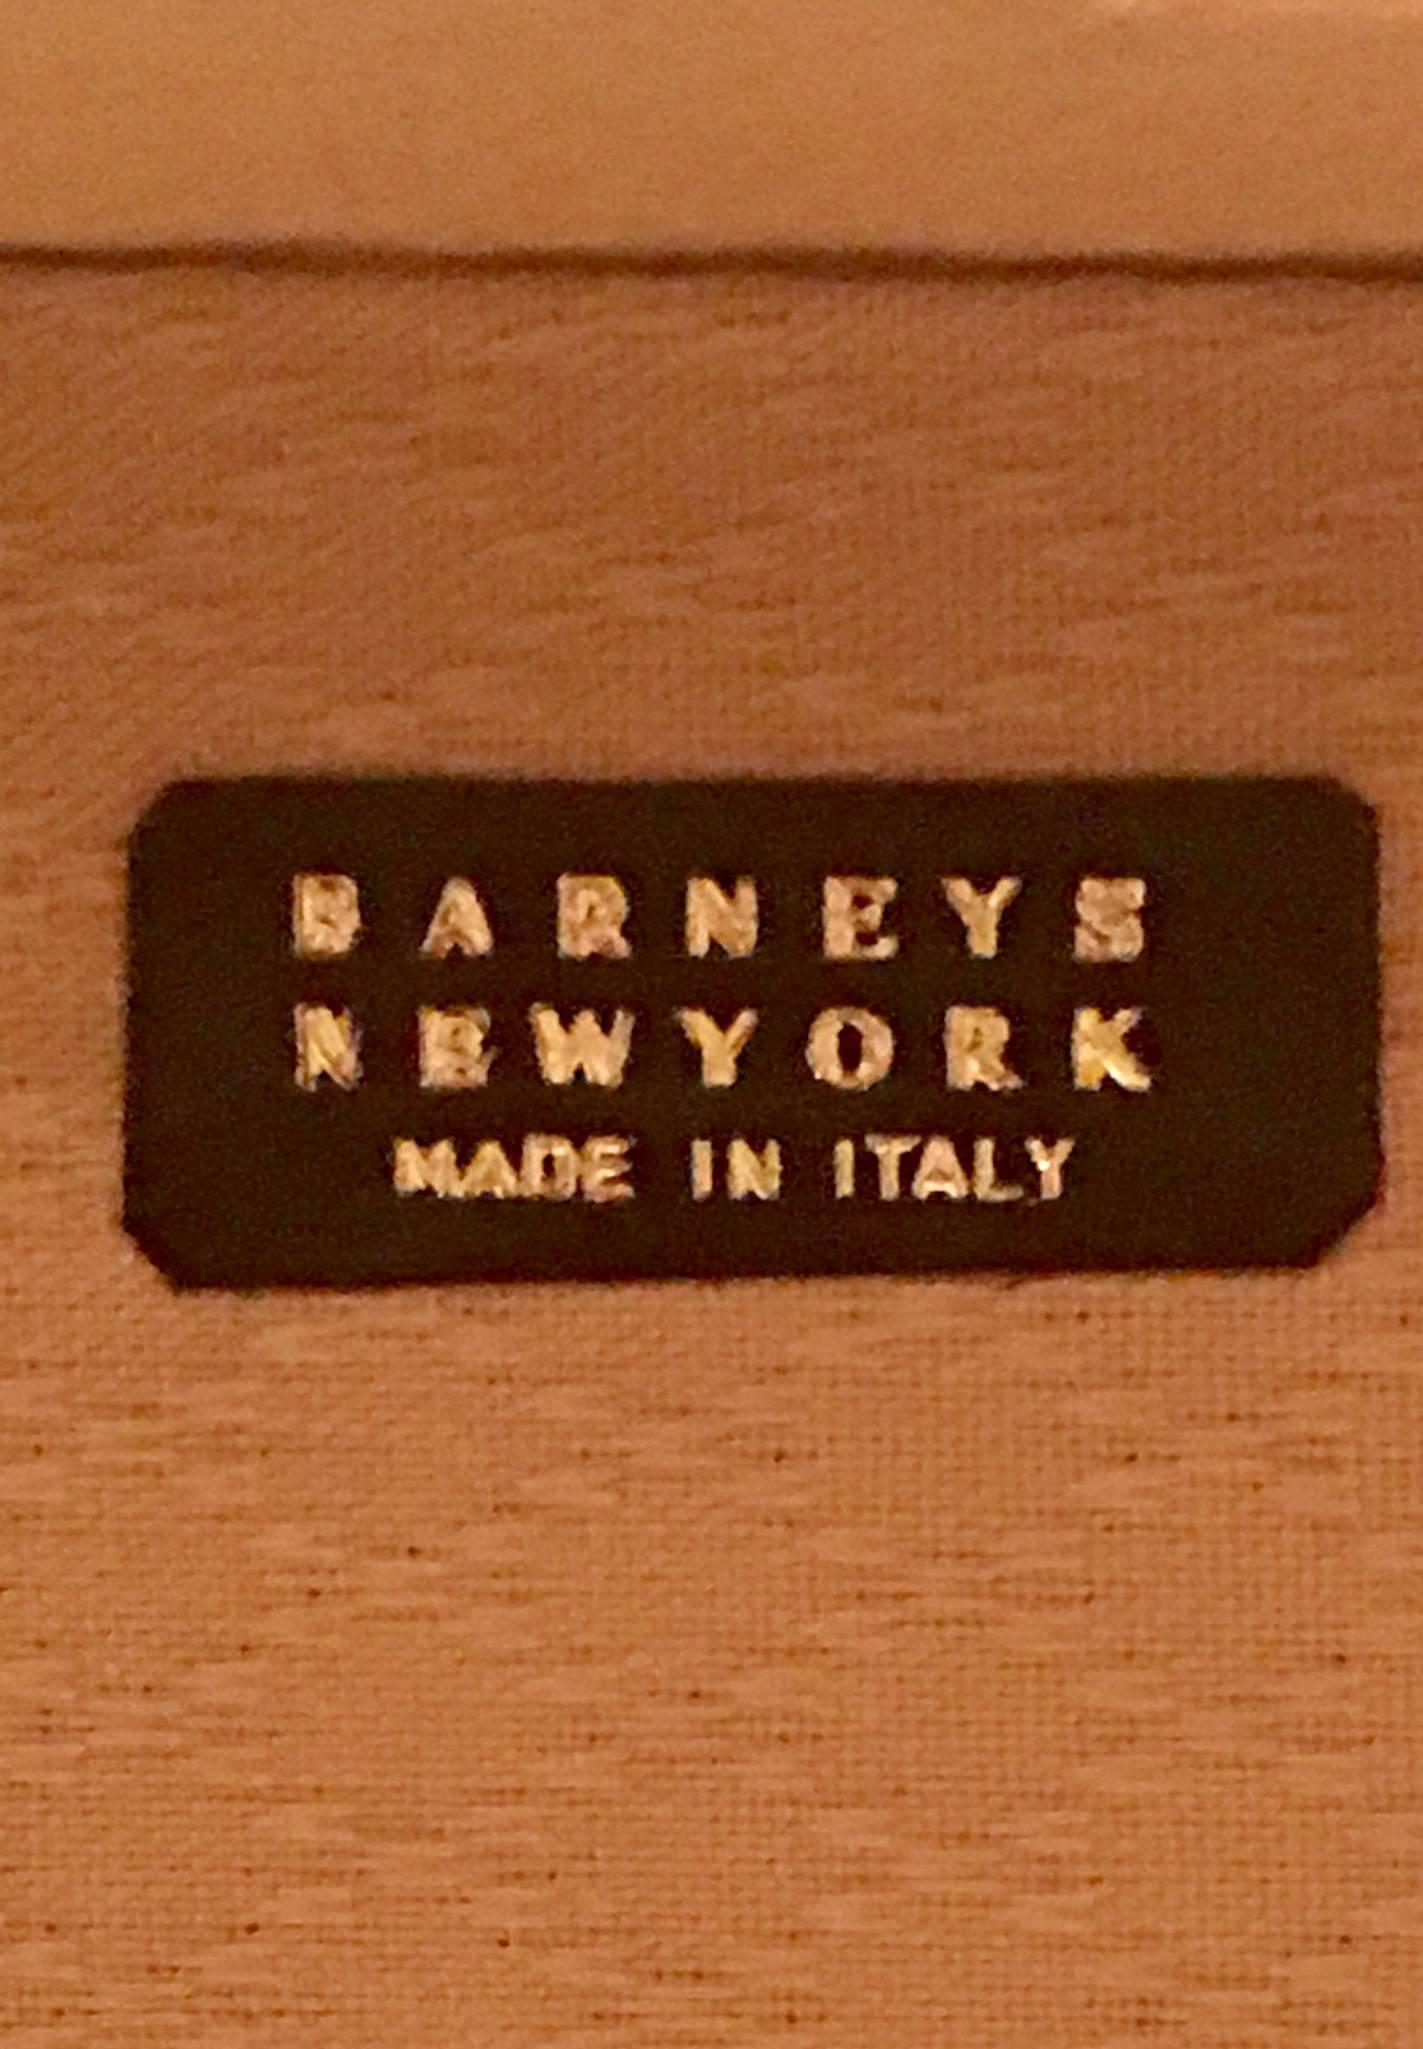 Vintage Italian Vellum and Leather Suitcase Made for Barney's New York 1